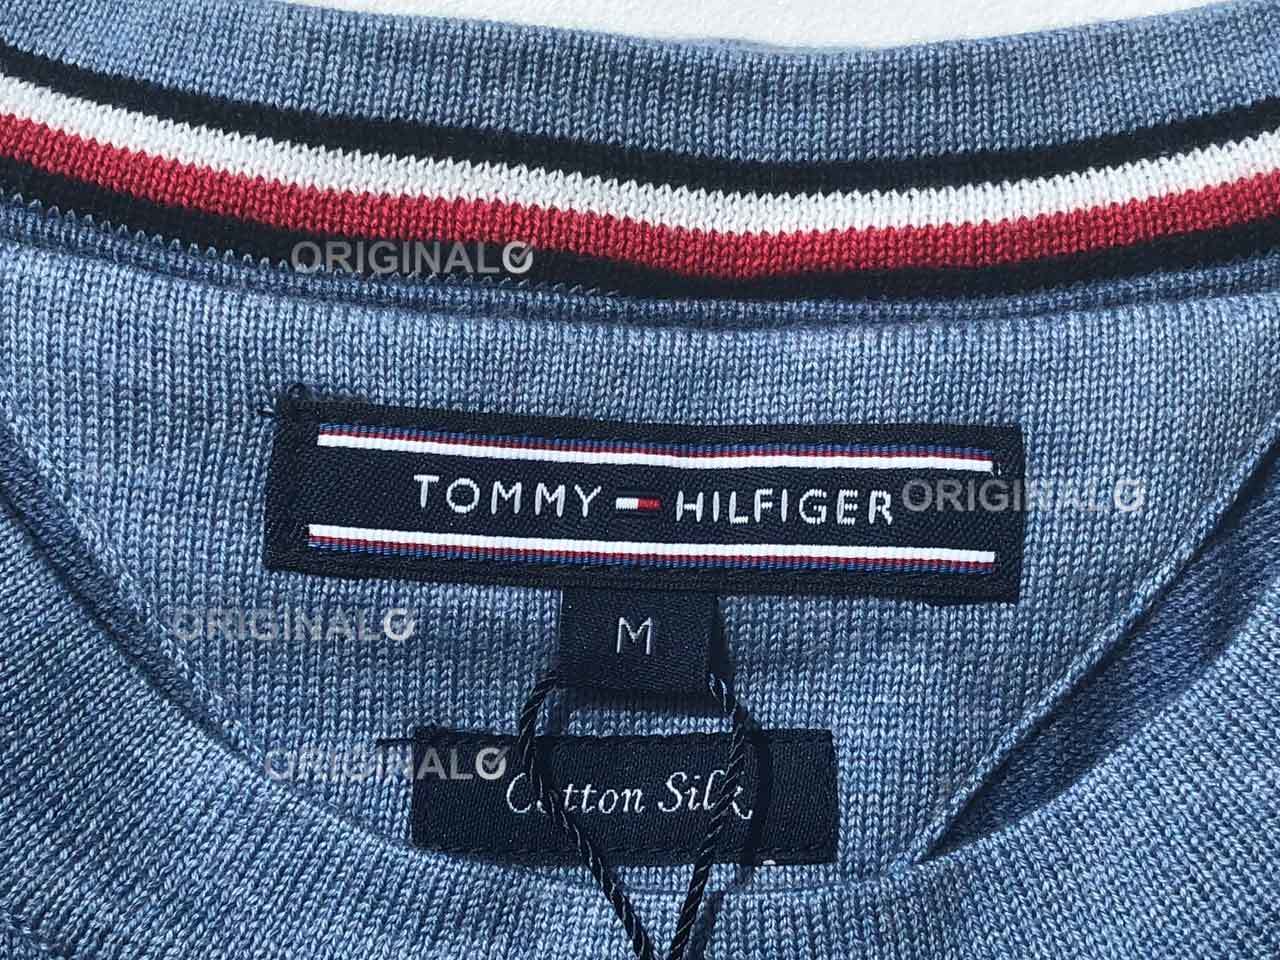 the real tommy hilfiger